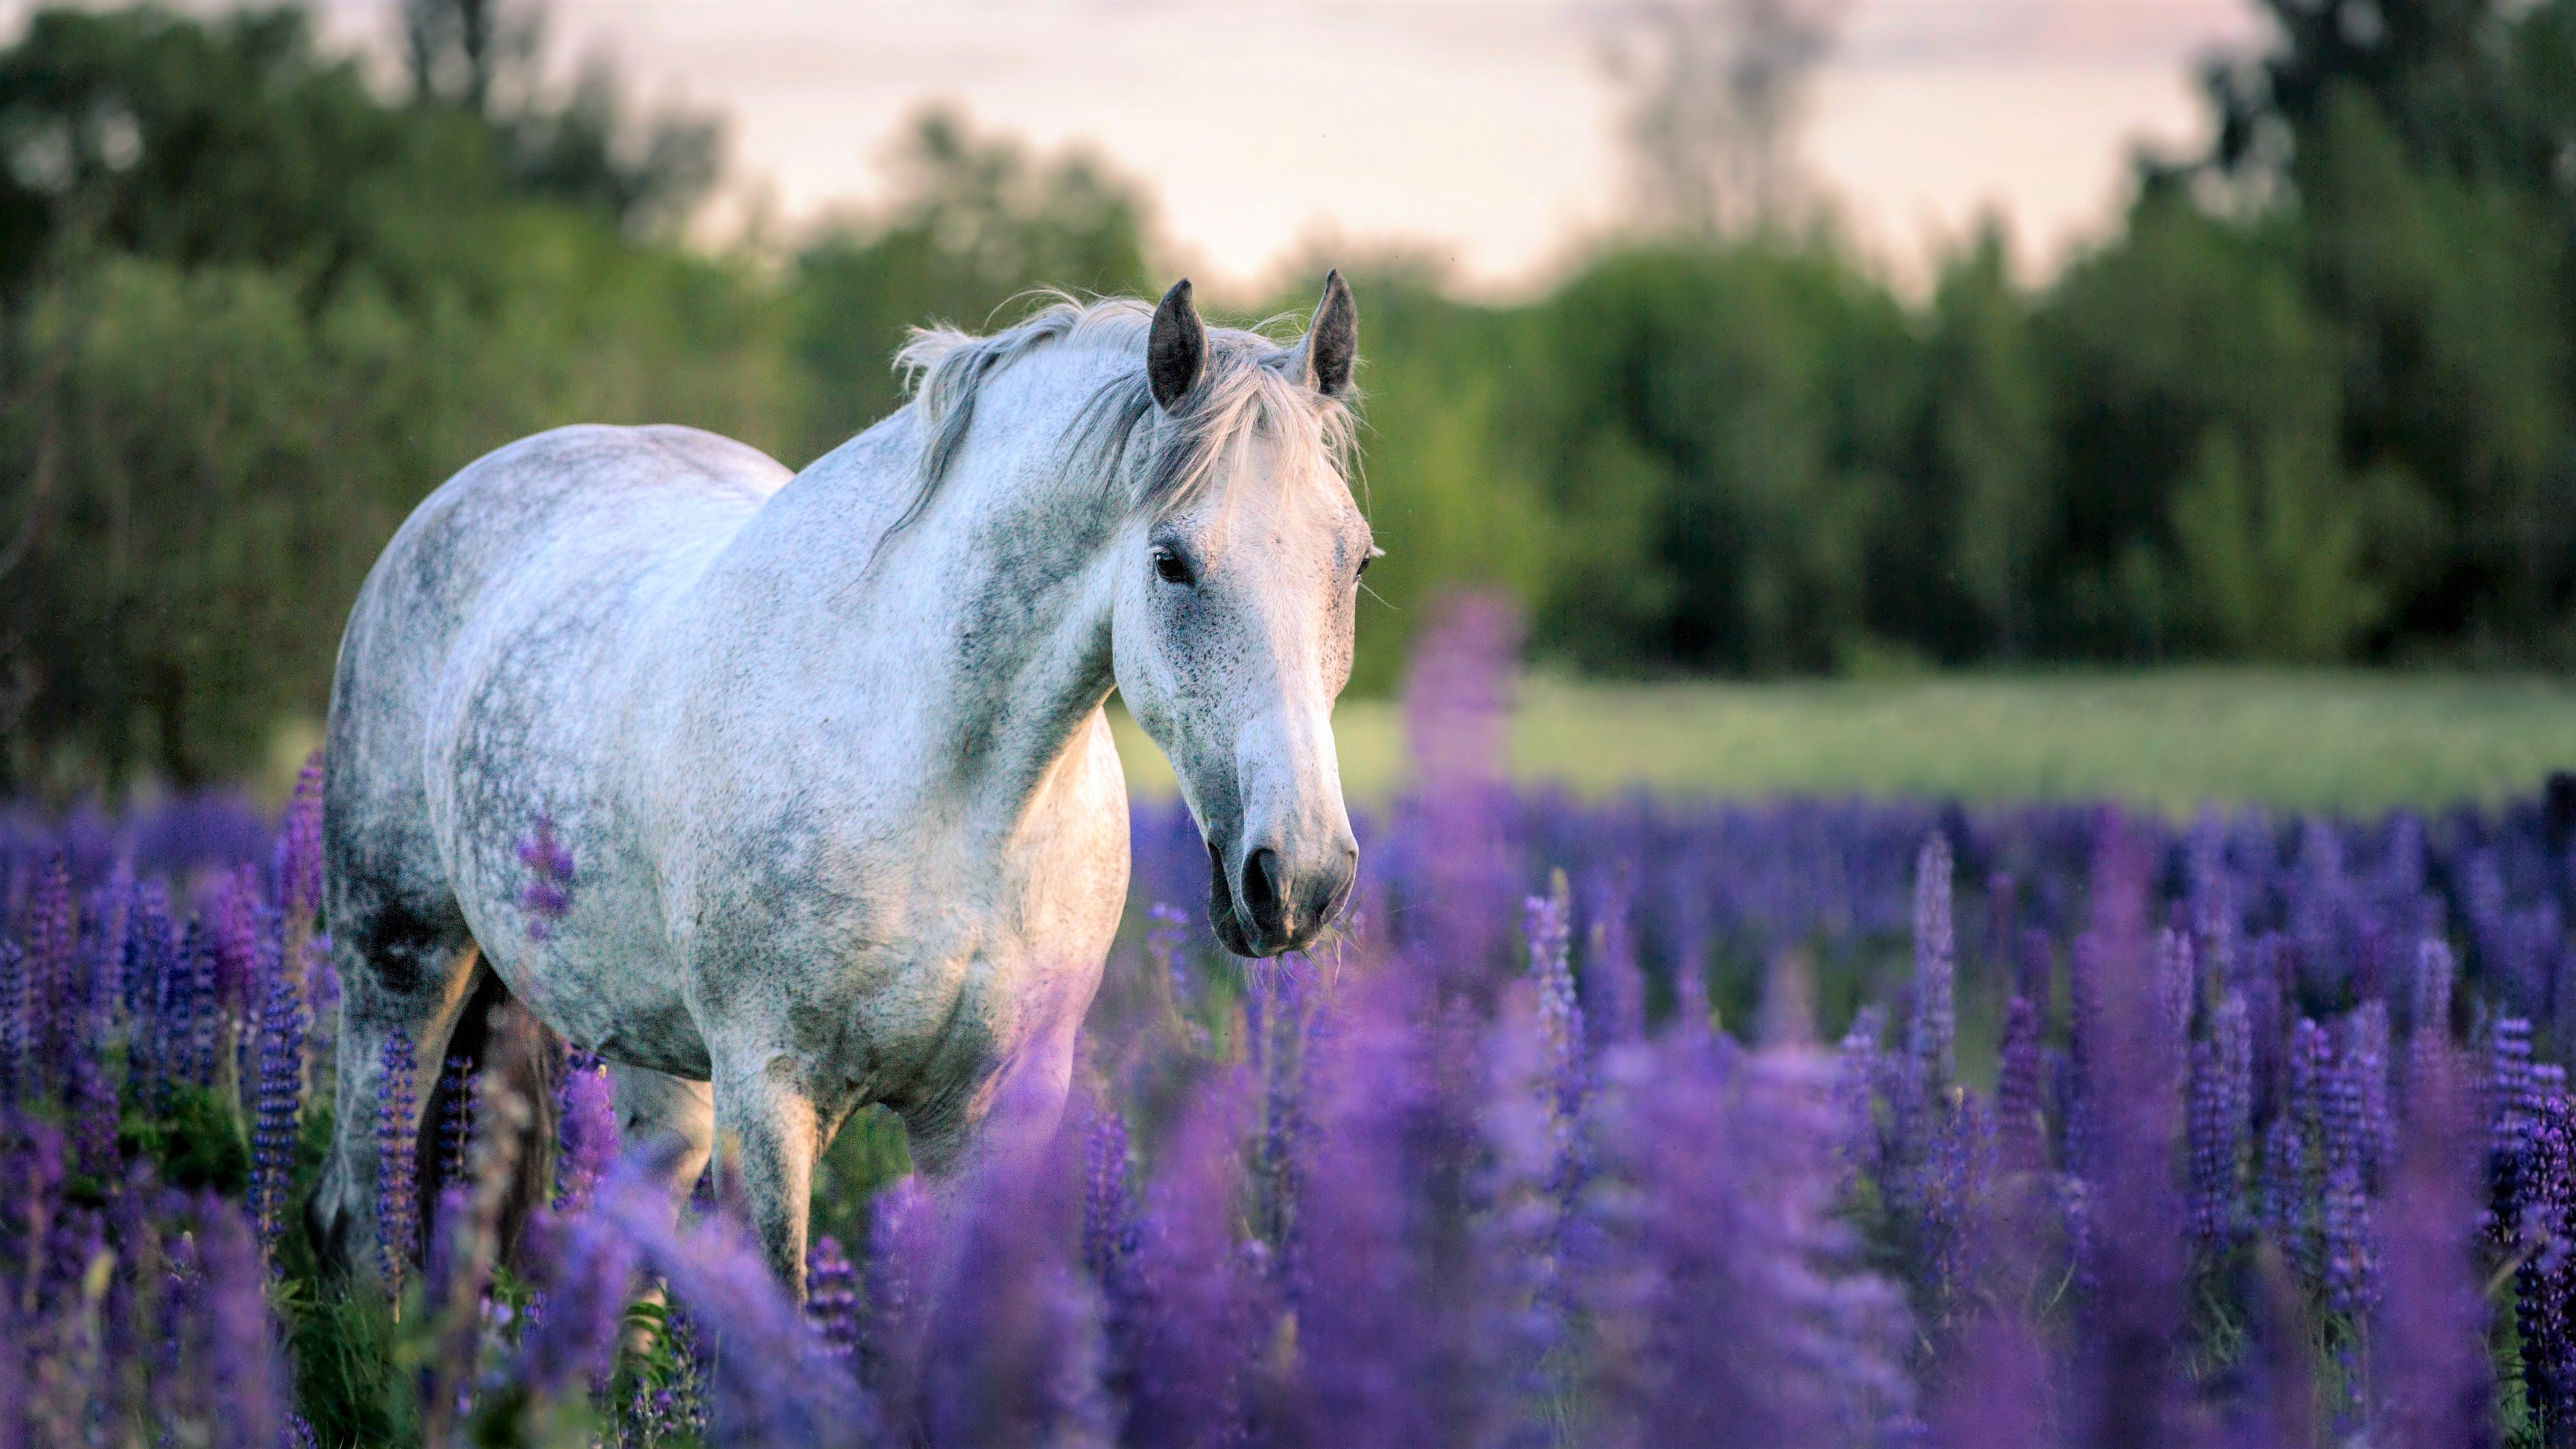 6 Tips for Taking Great Pictures of Your Horse